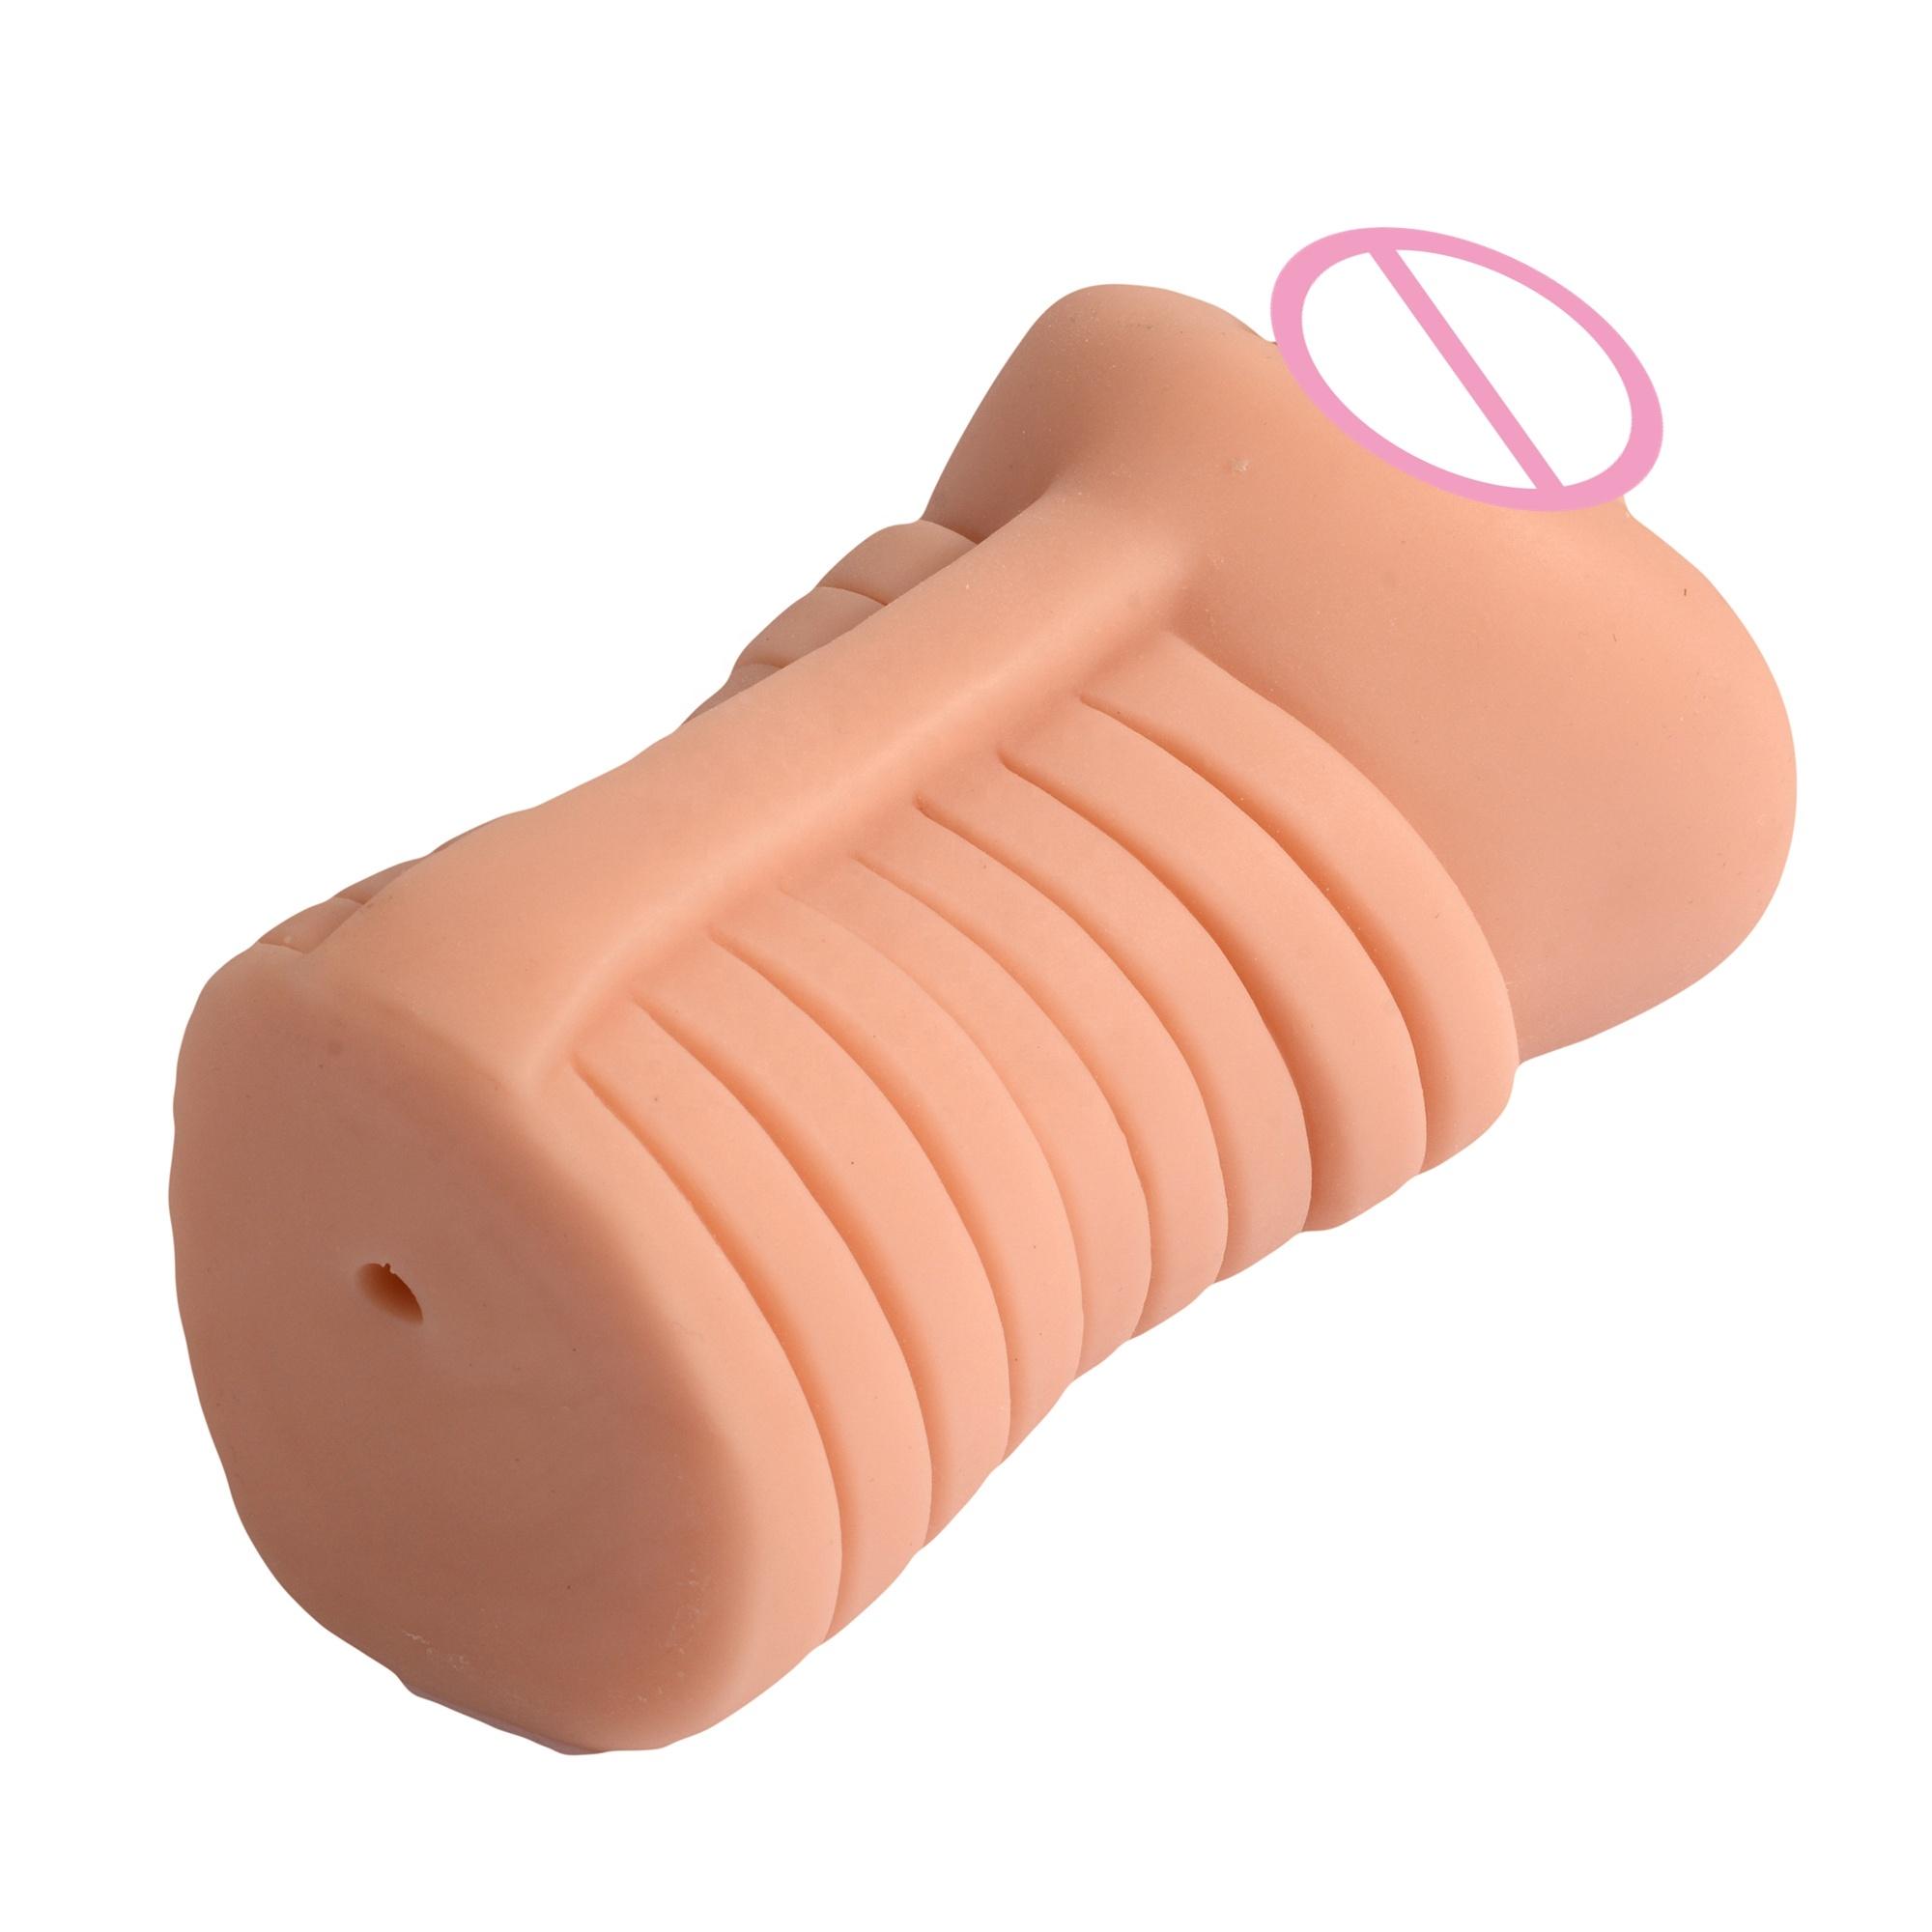  Lifelike Vaginal Shaped For Male Penis Stimulator Wholesale Sex Toys Consoldores Orgasm Hand Hold Sex Tools